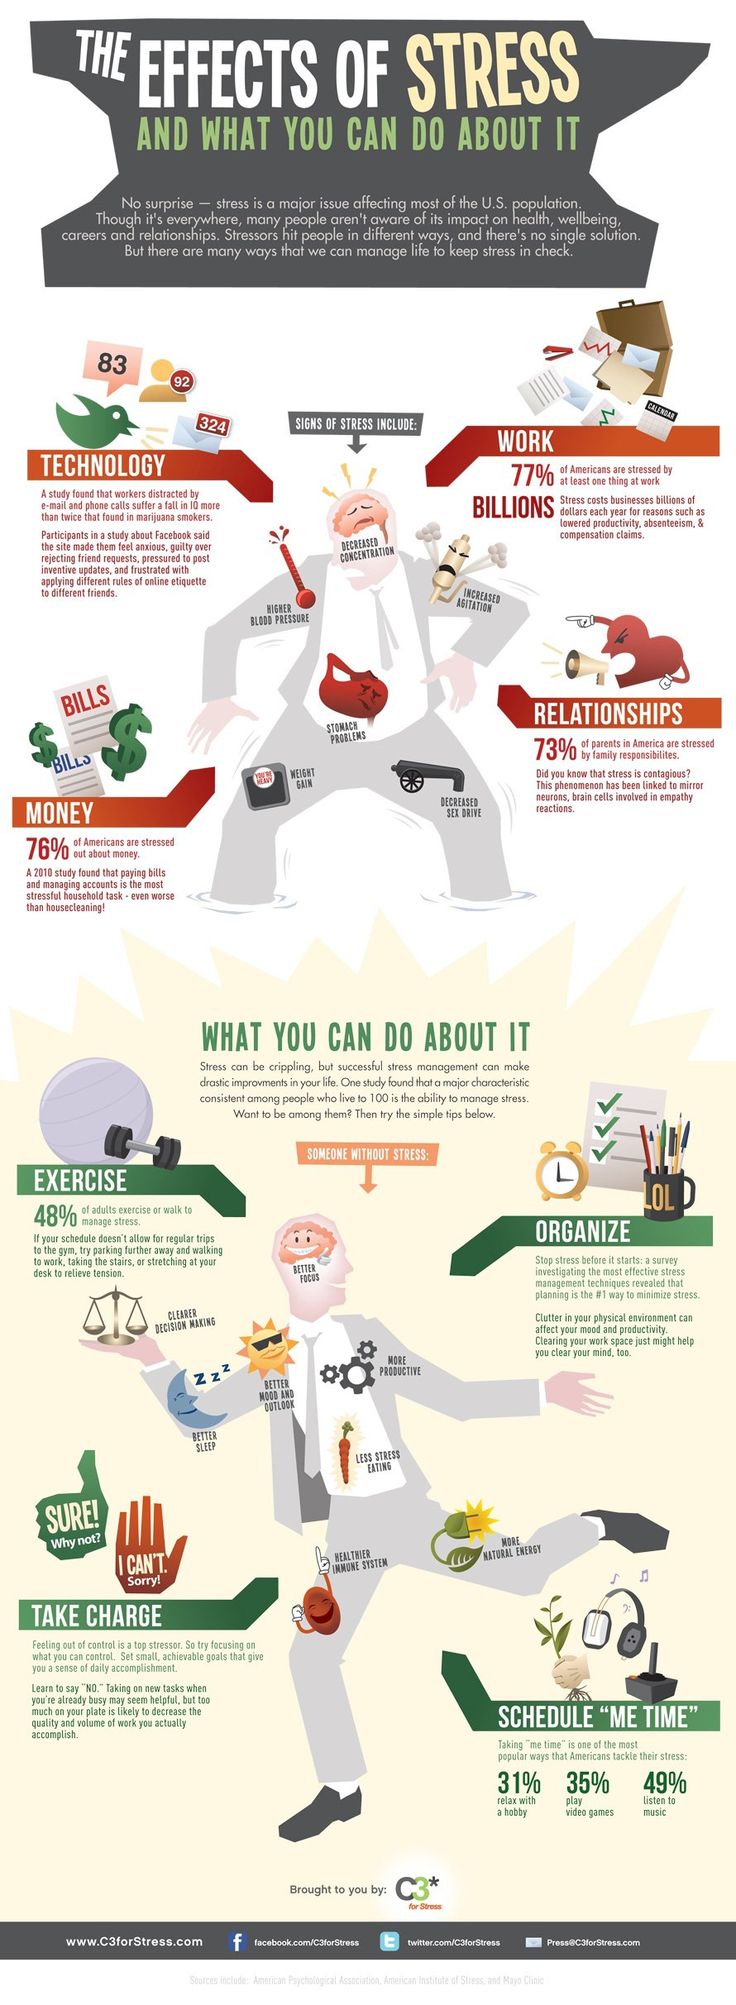 1567532409_688_Psychology-Infographic-How-Stress-Can-Increase-Risk-Of-Being Psychology Infographic : How Stress Can Increase Risk Of Being Depressed